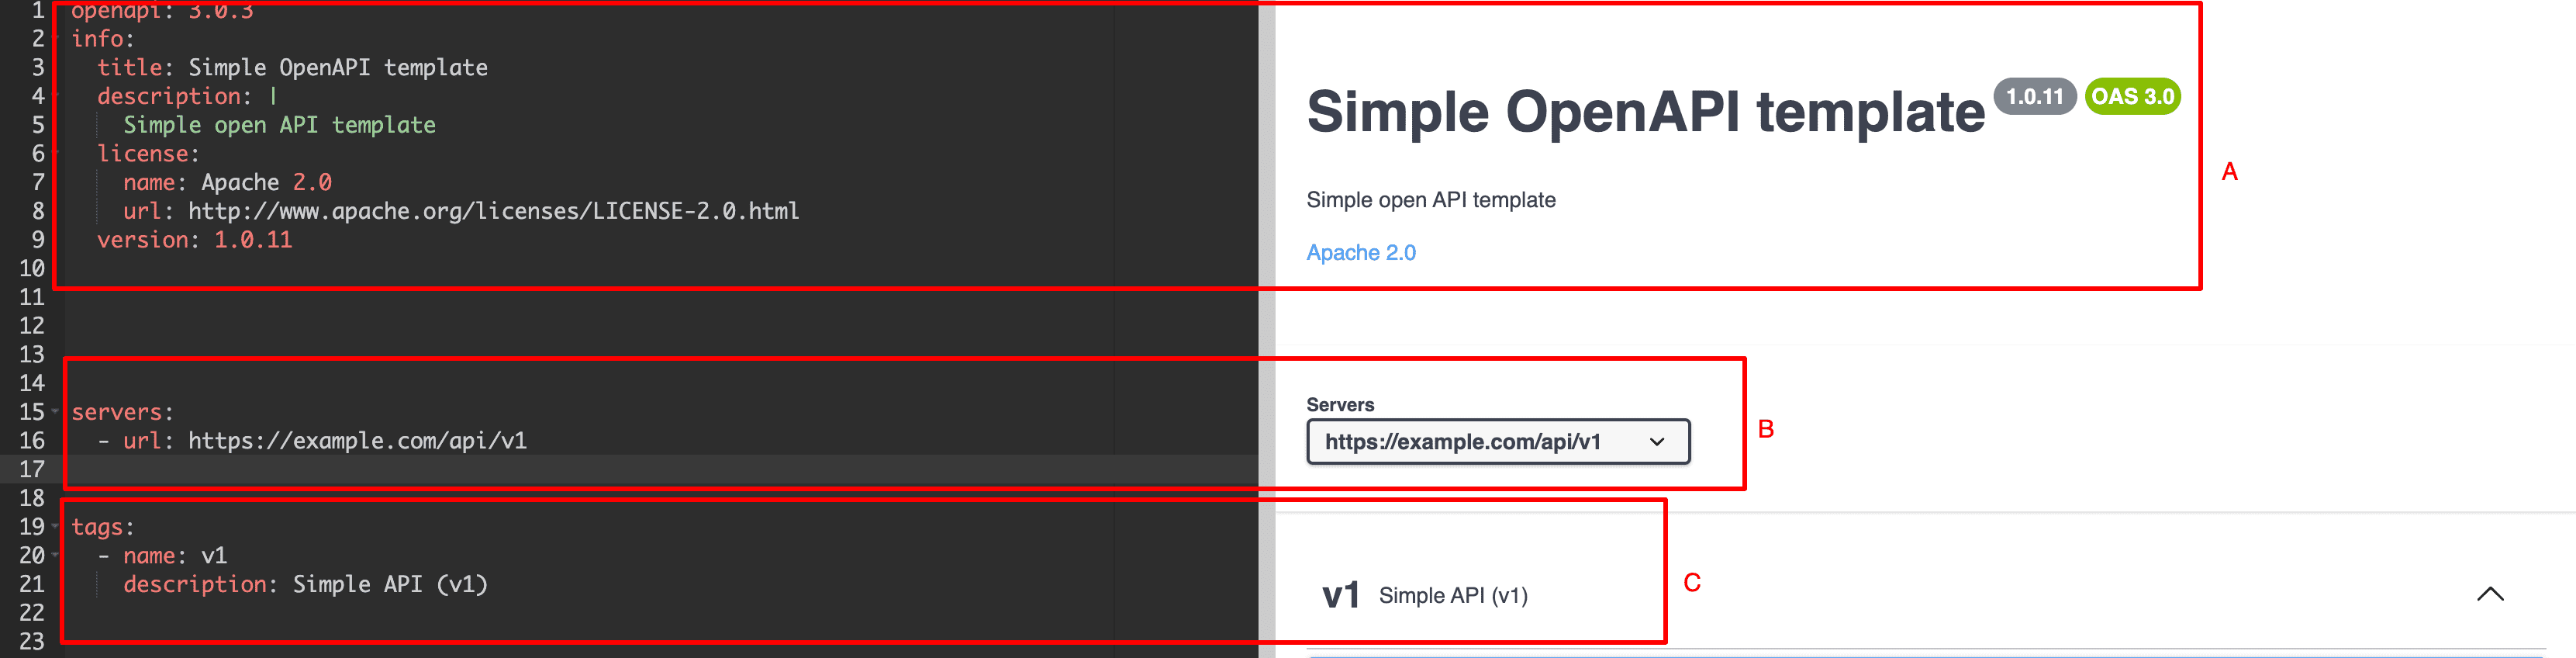 OpenAPI specification info section [→]